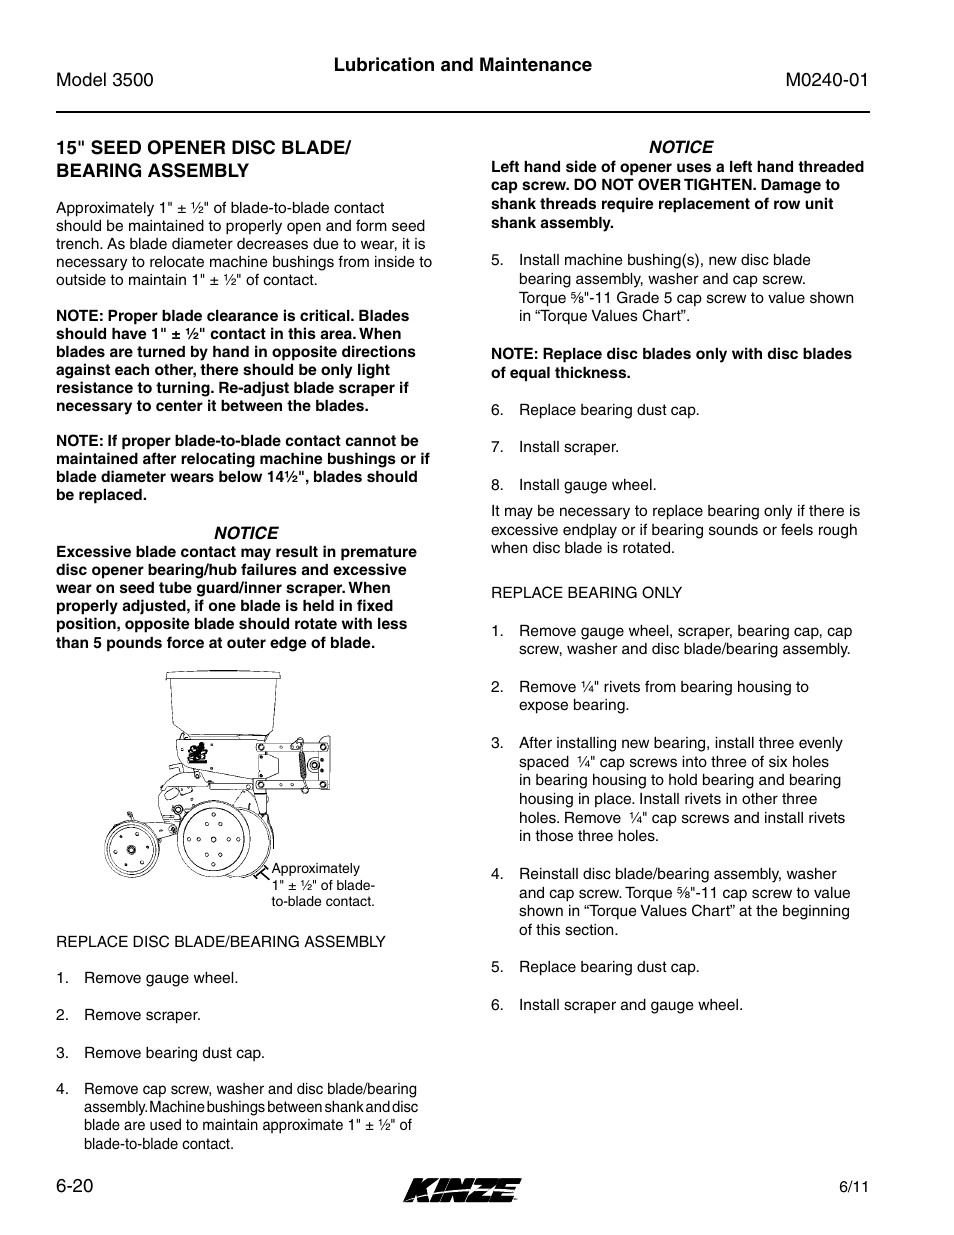 Kinze 3500 Lift and Rotate Planter Rev. 7/14 User Manual | Page 116 / 140